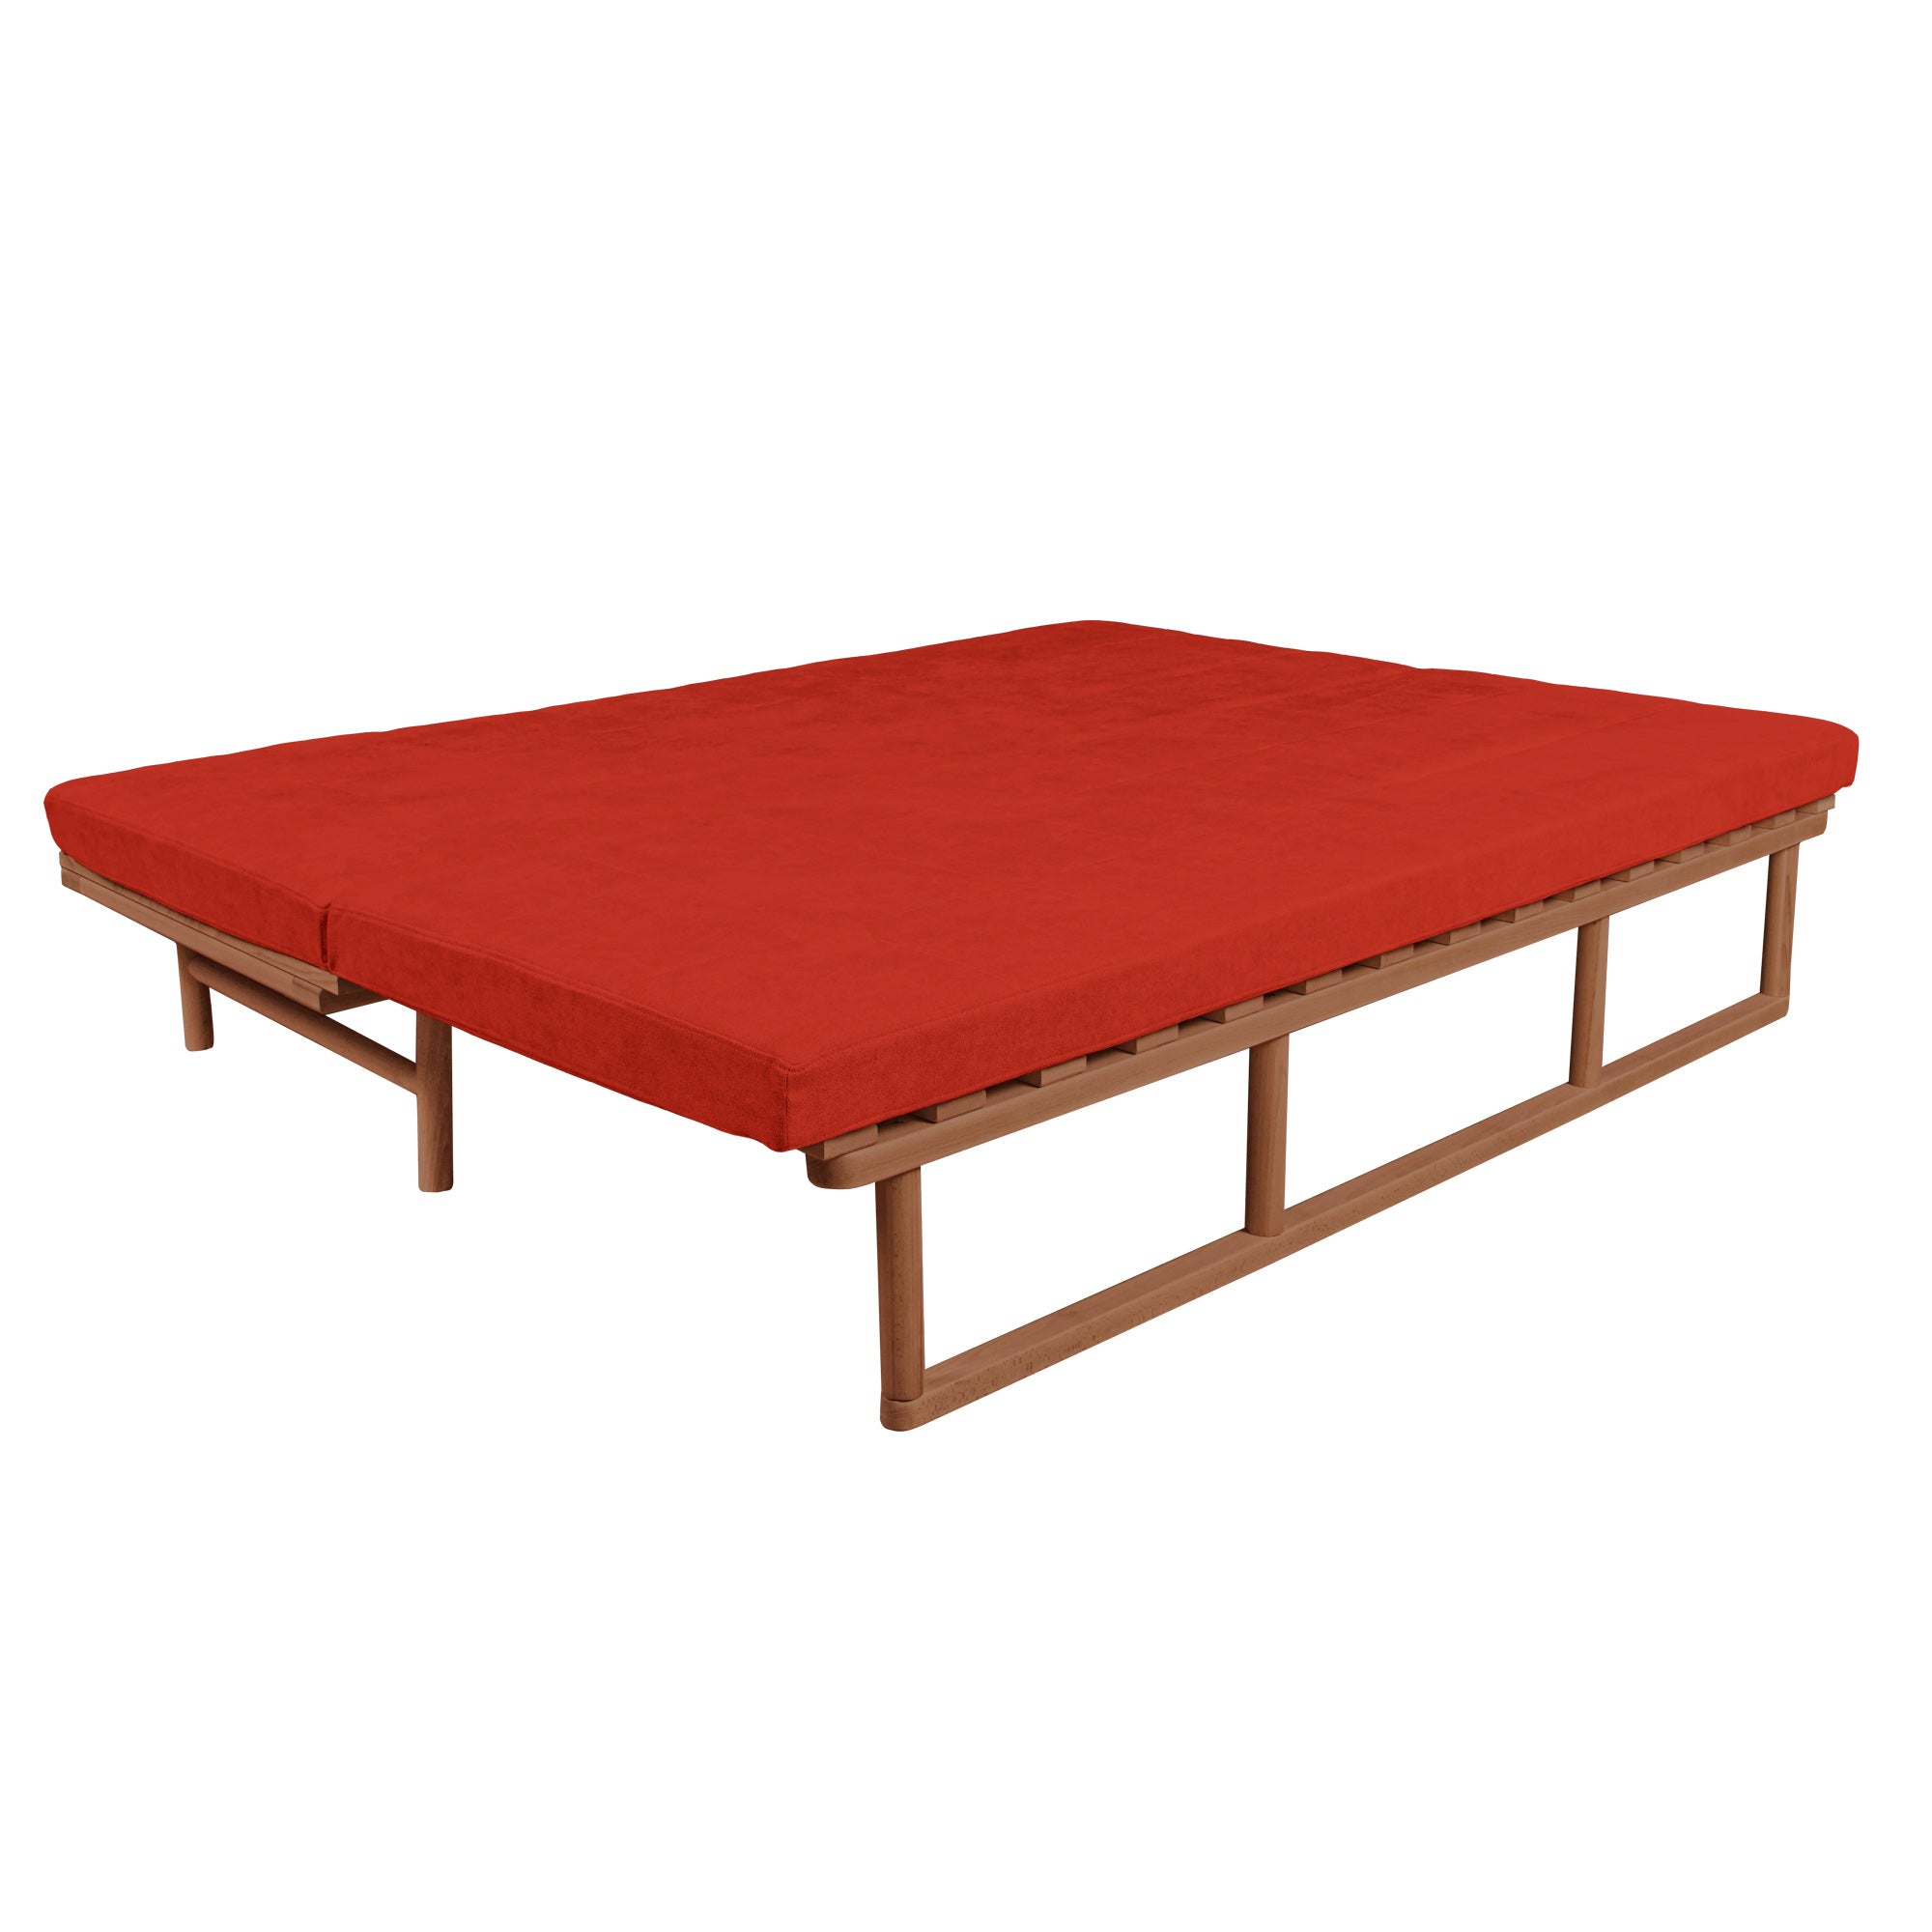 Le MAR Folding Daybed, Beech Wood Frame, Caramel Colour-red upholstery-folded view